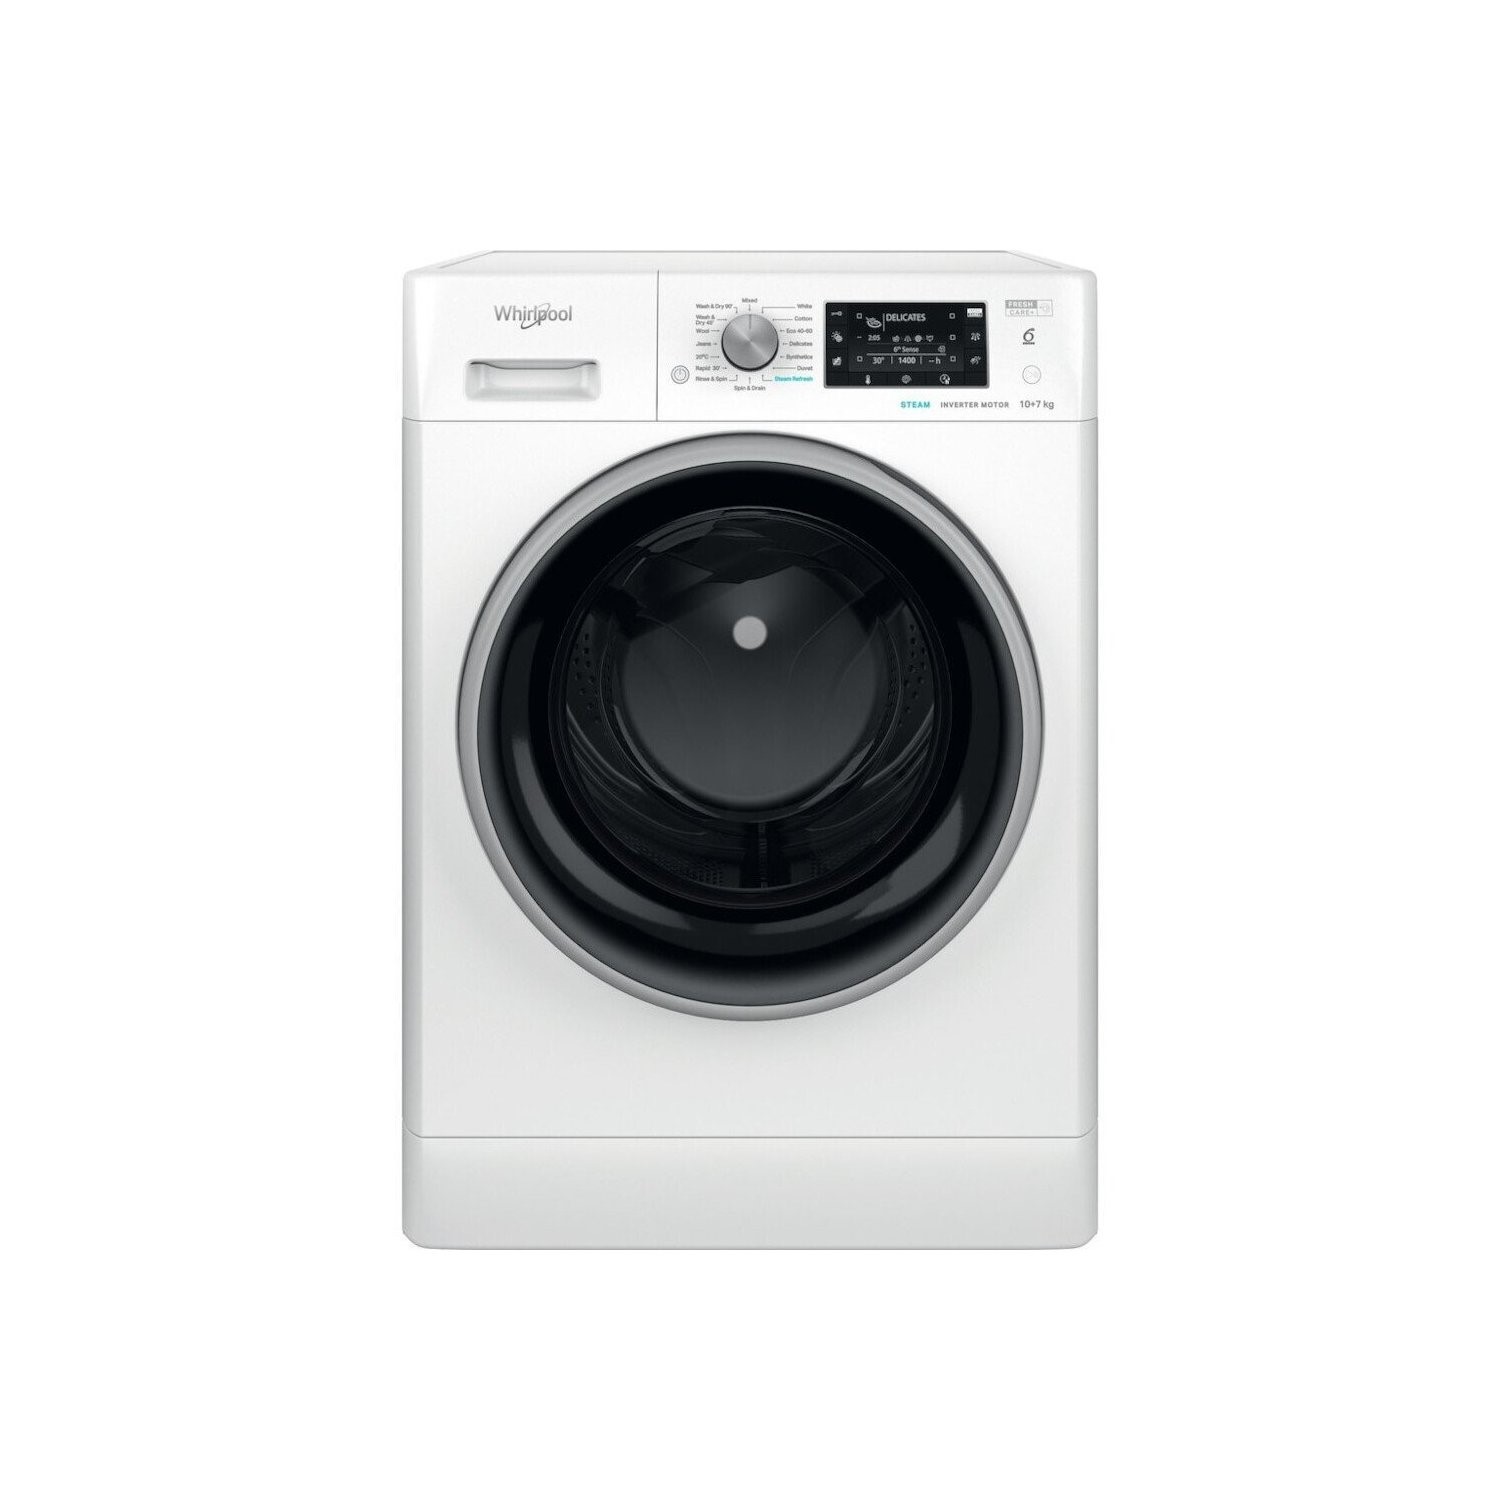 Photos - Other for Computer Whirlpool 6th sense 10kg Wash 7kg Dry 1400rpm Washer Dryer - White 8699916 